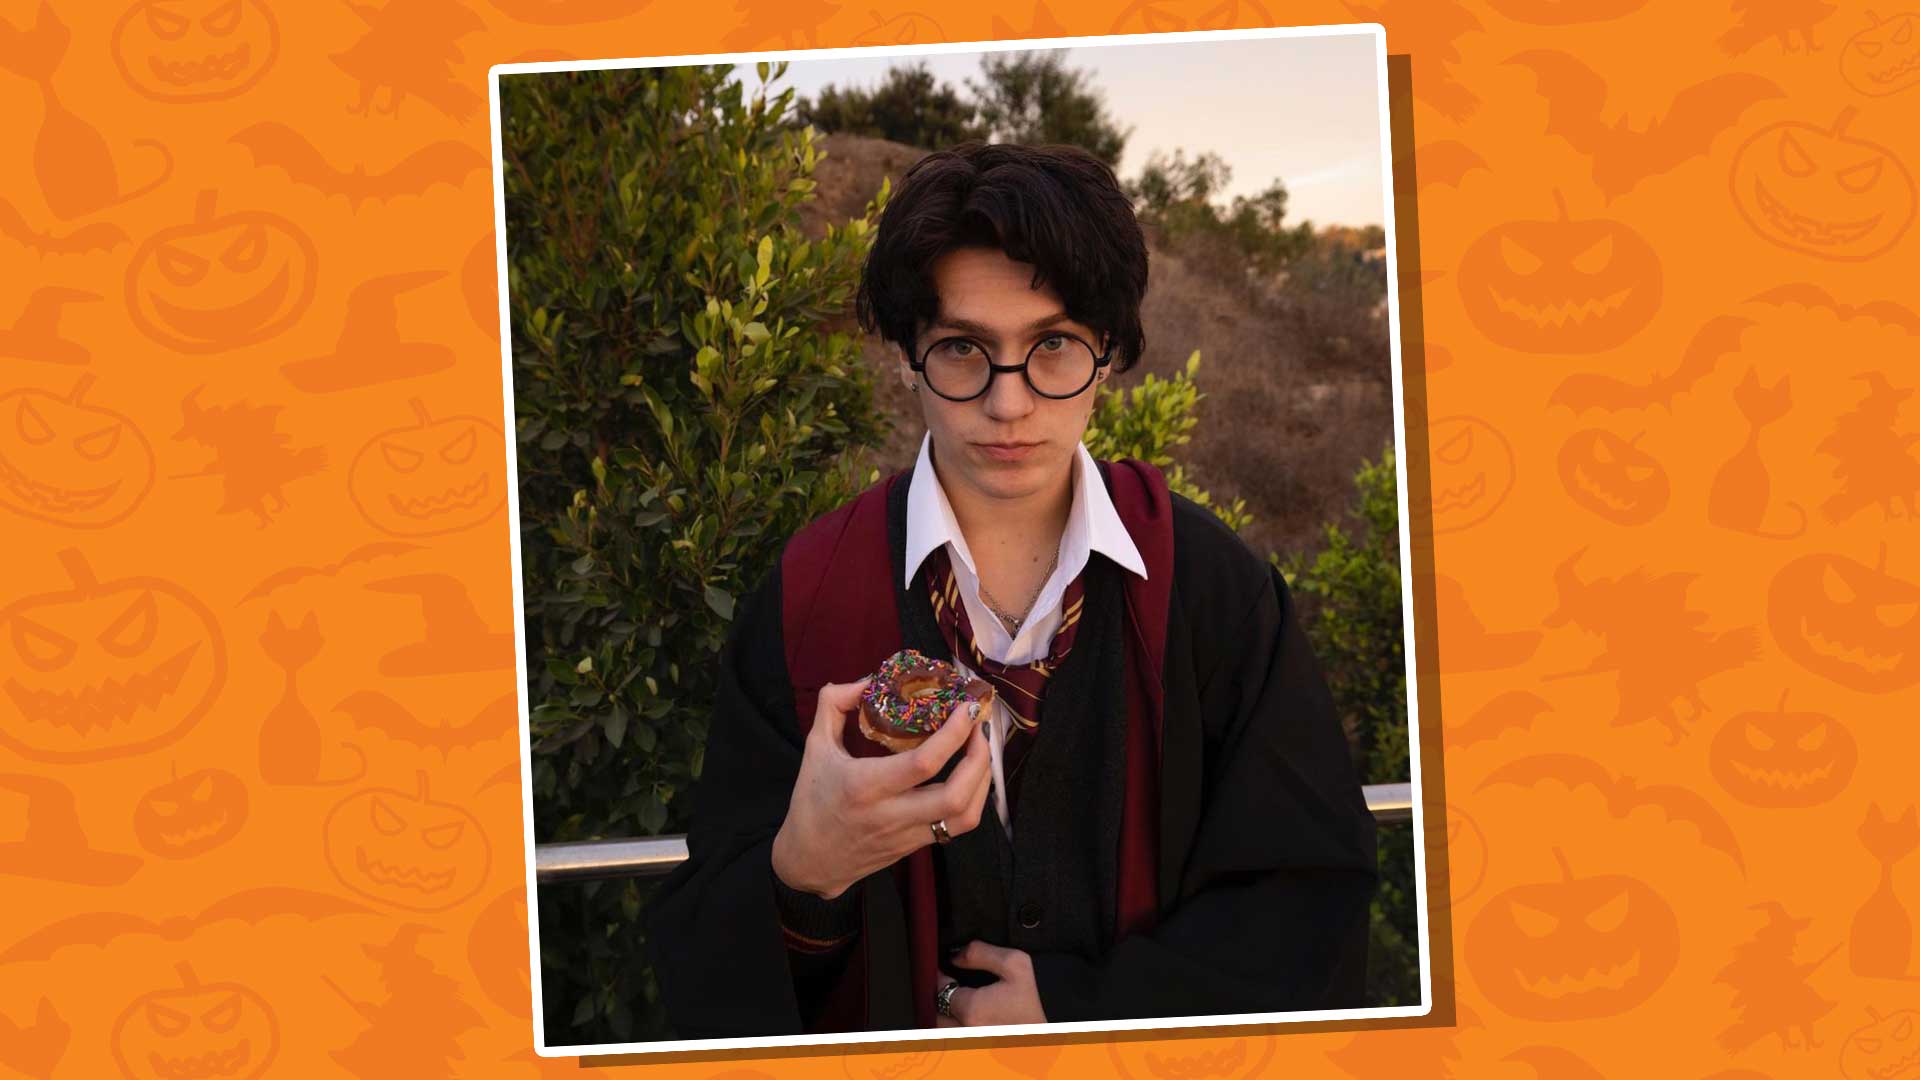 Chase Hudson dressed as Harry Potter